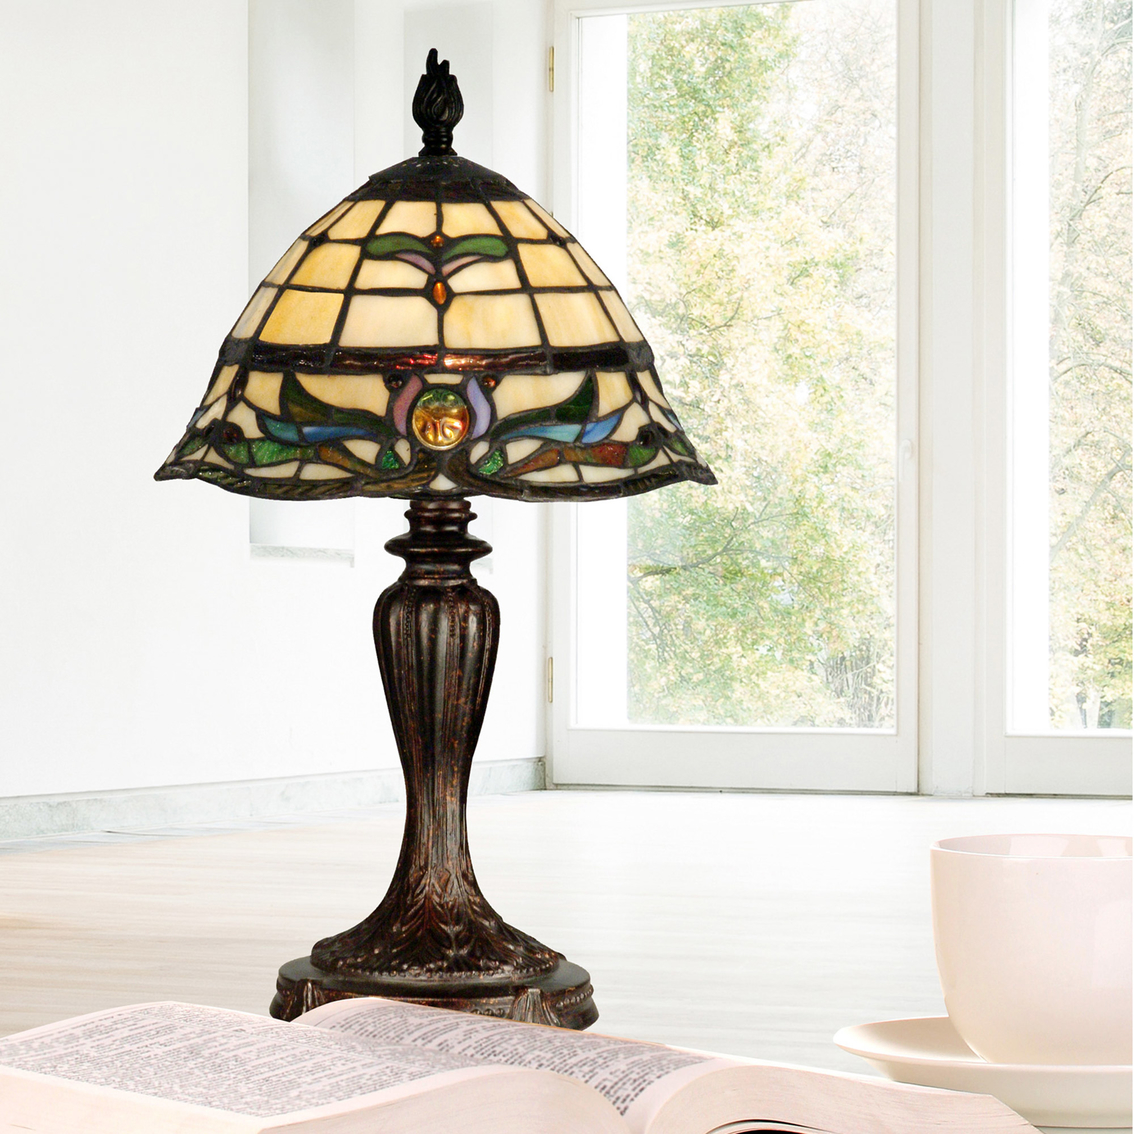 Dale Tiffany Jassmyne 18.5 in. Table Lamp - Image 2 of 2